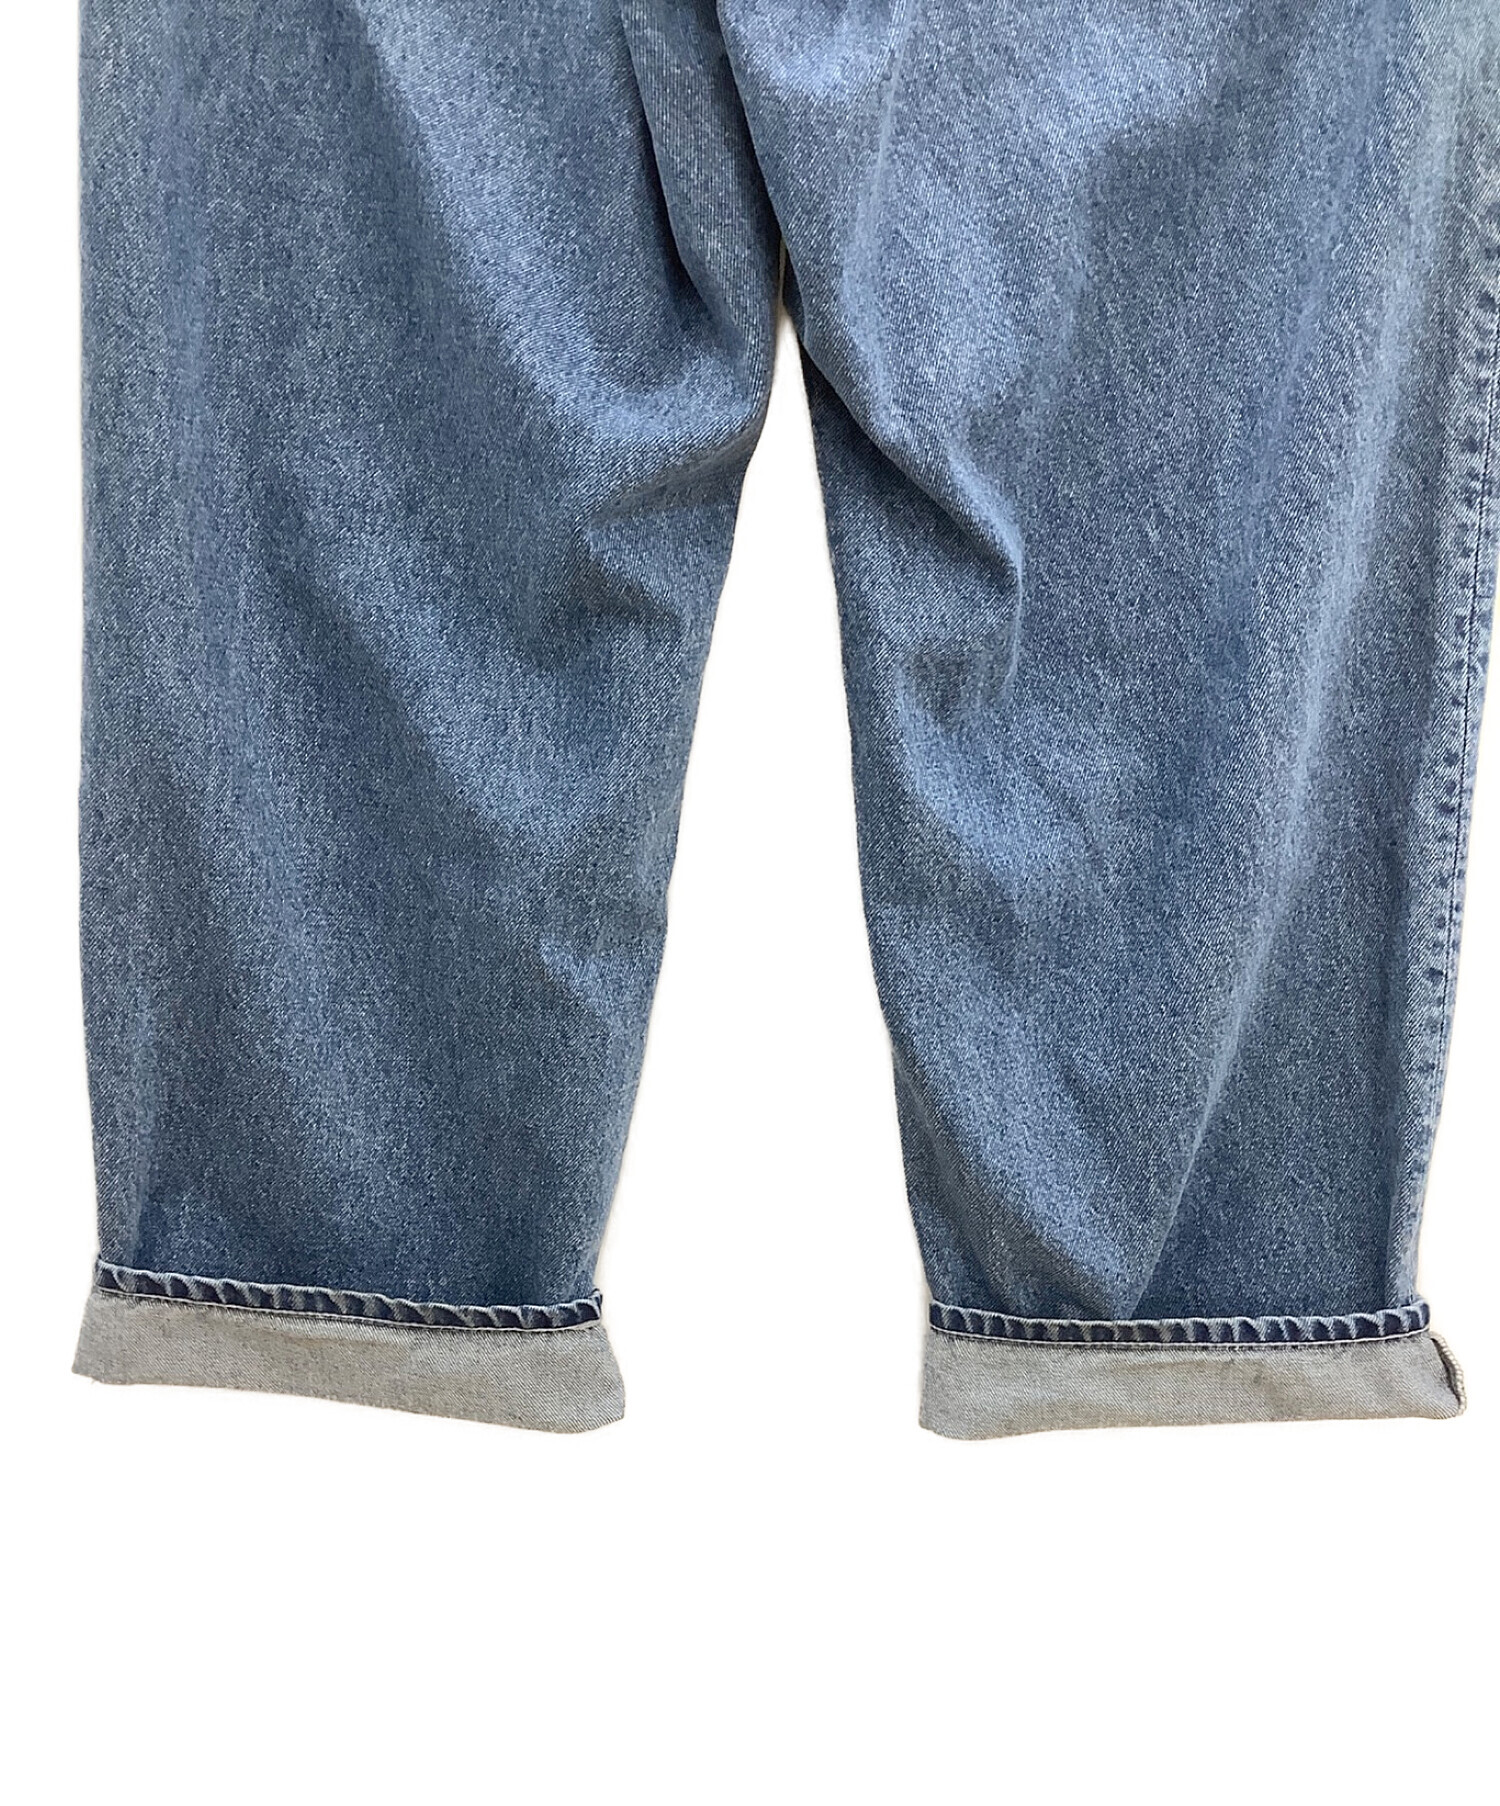 COOTIE PRODUCTIONS (クーティープロダクツ) 5 Pocket Baggy Denim Easy Pants COOTIE  PRODUCTIONS ブルー サイズ:M